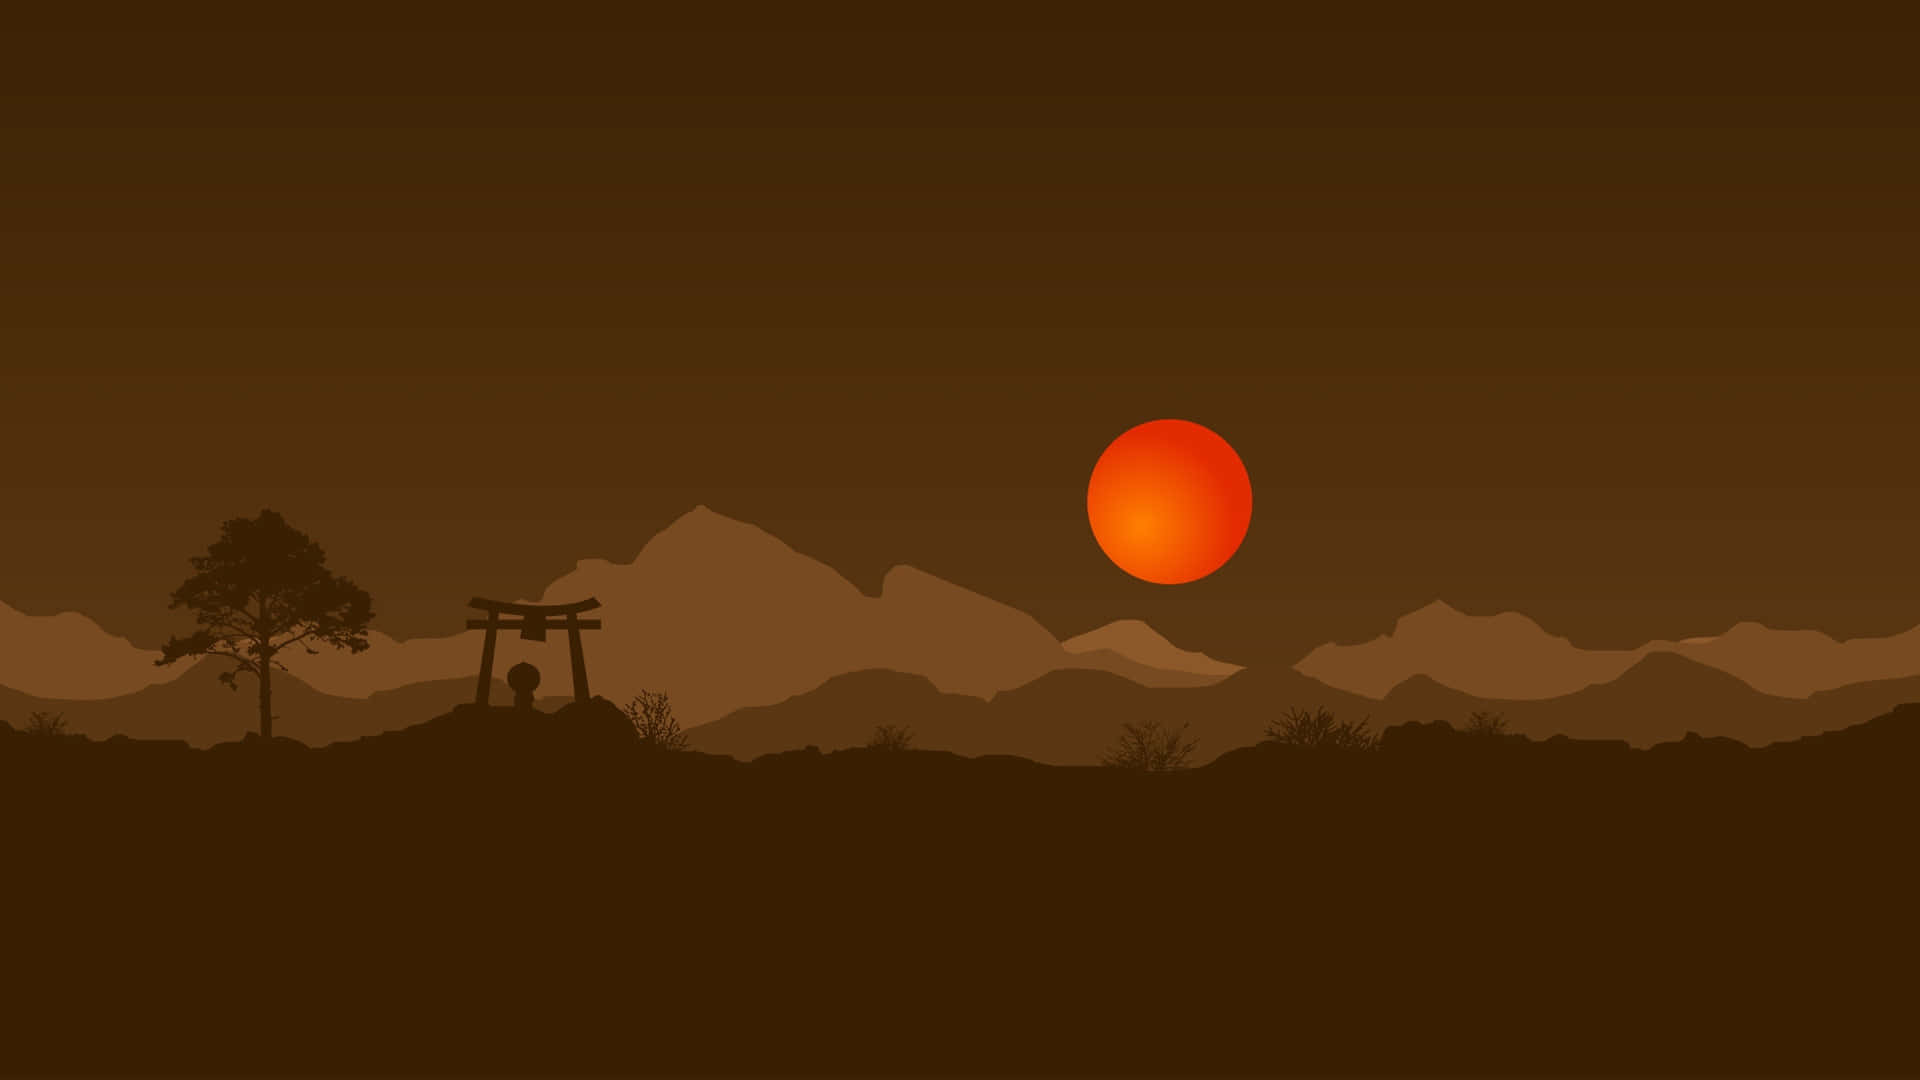 A Silhouette Of A Mountain With A Sun In The Background Wallpaper